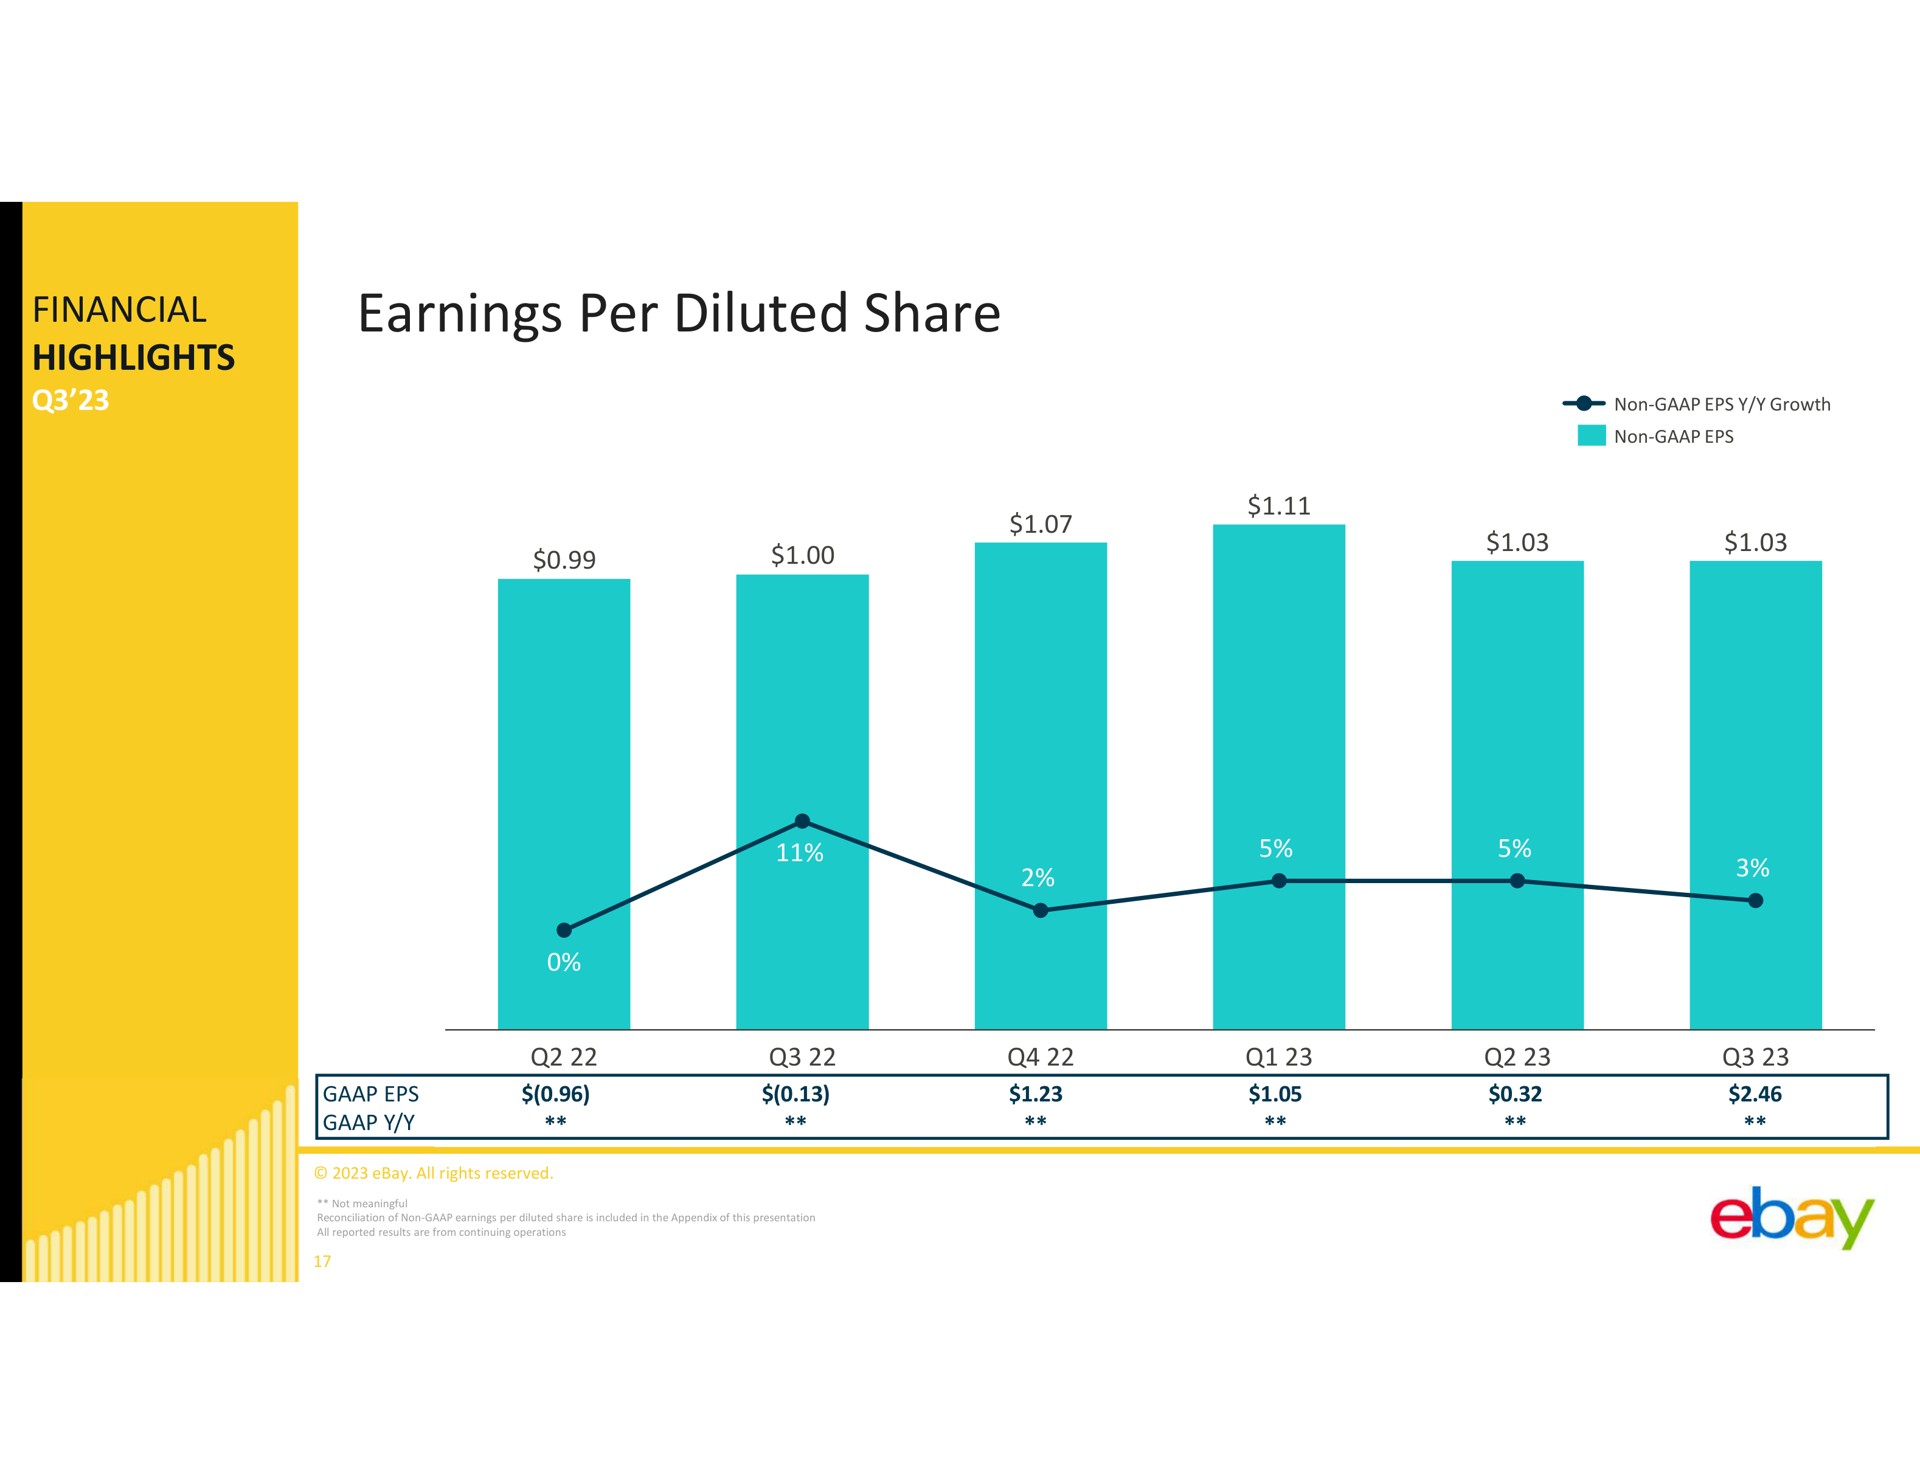 financial highlights earnings per diluted share | eBay